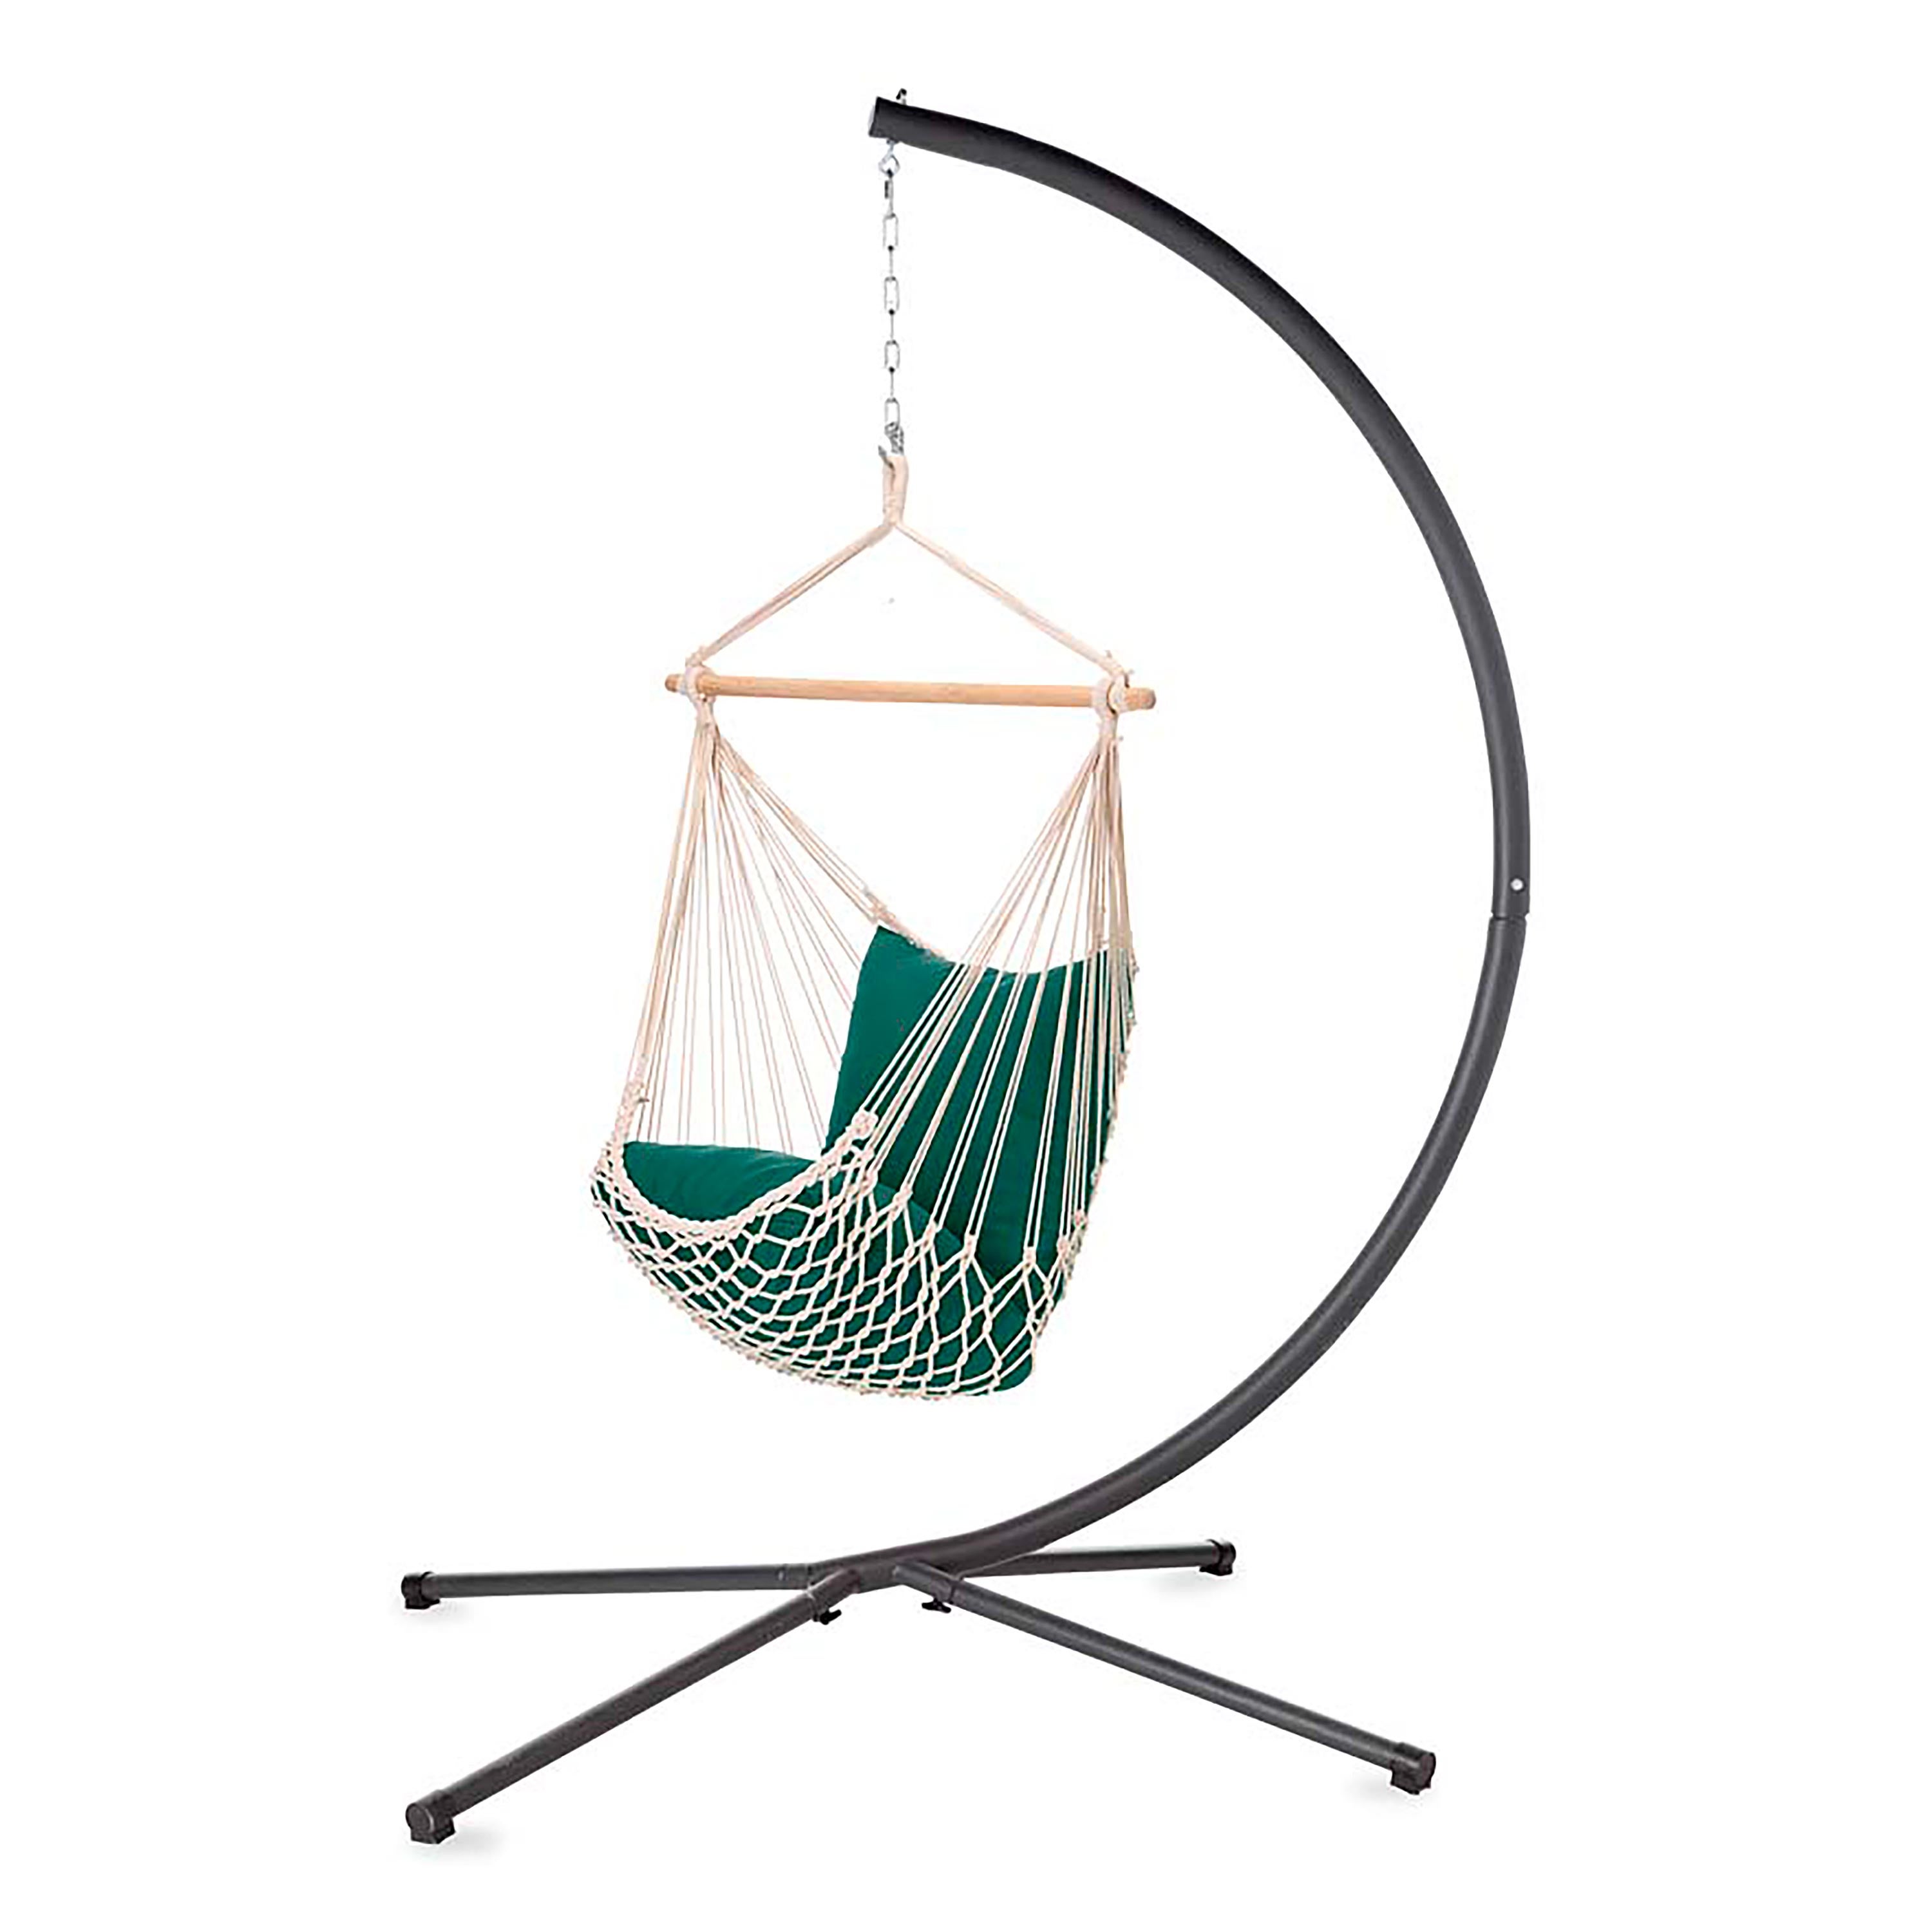 Steel C-Frame Stand for Hanging Rope Hammock Swing